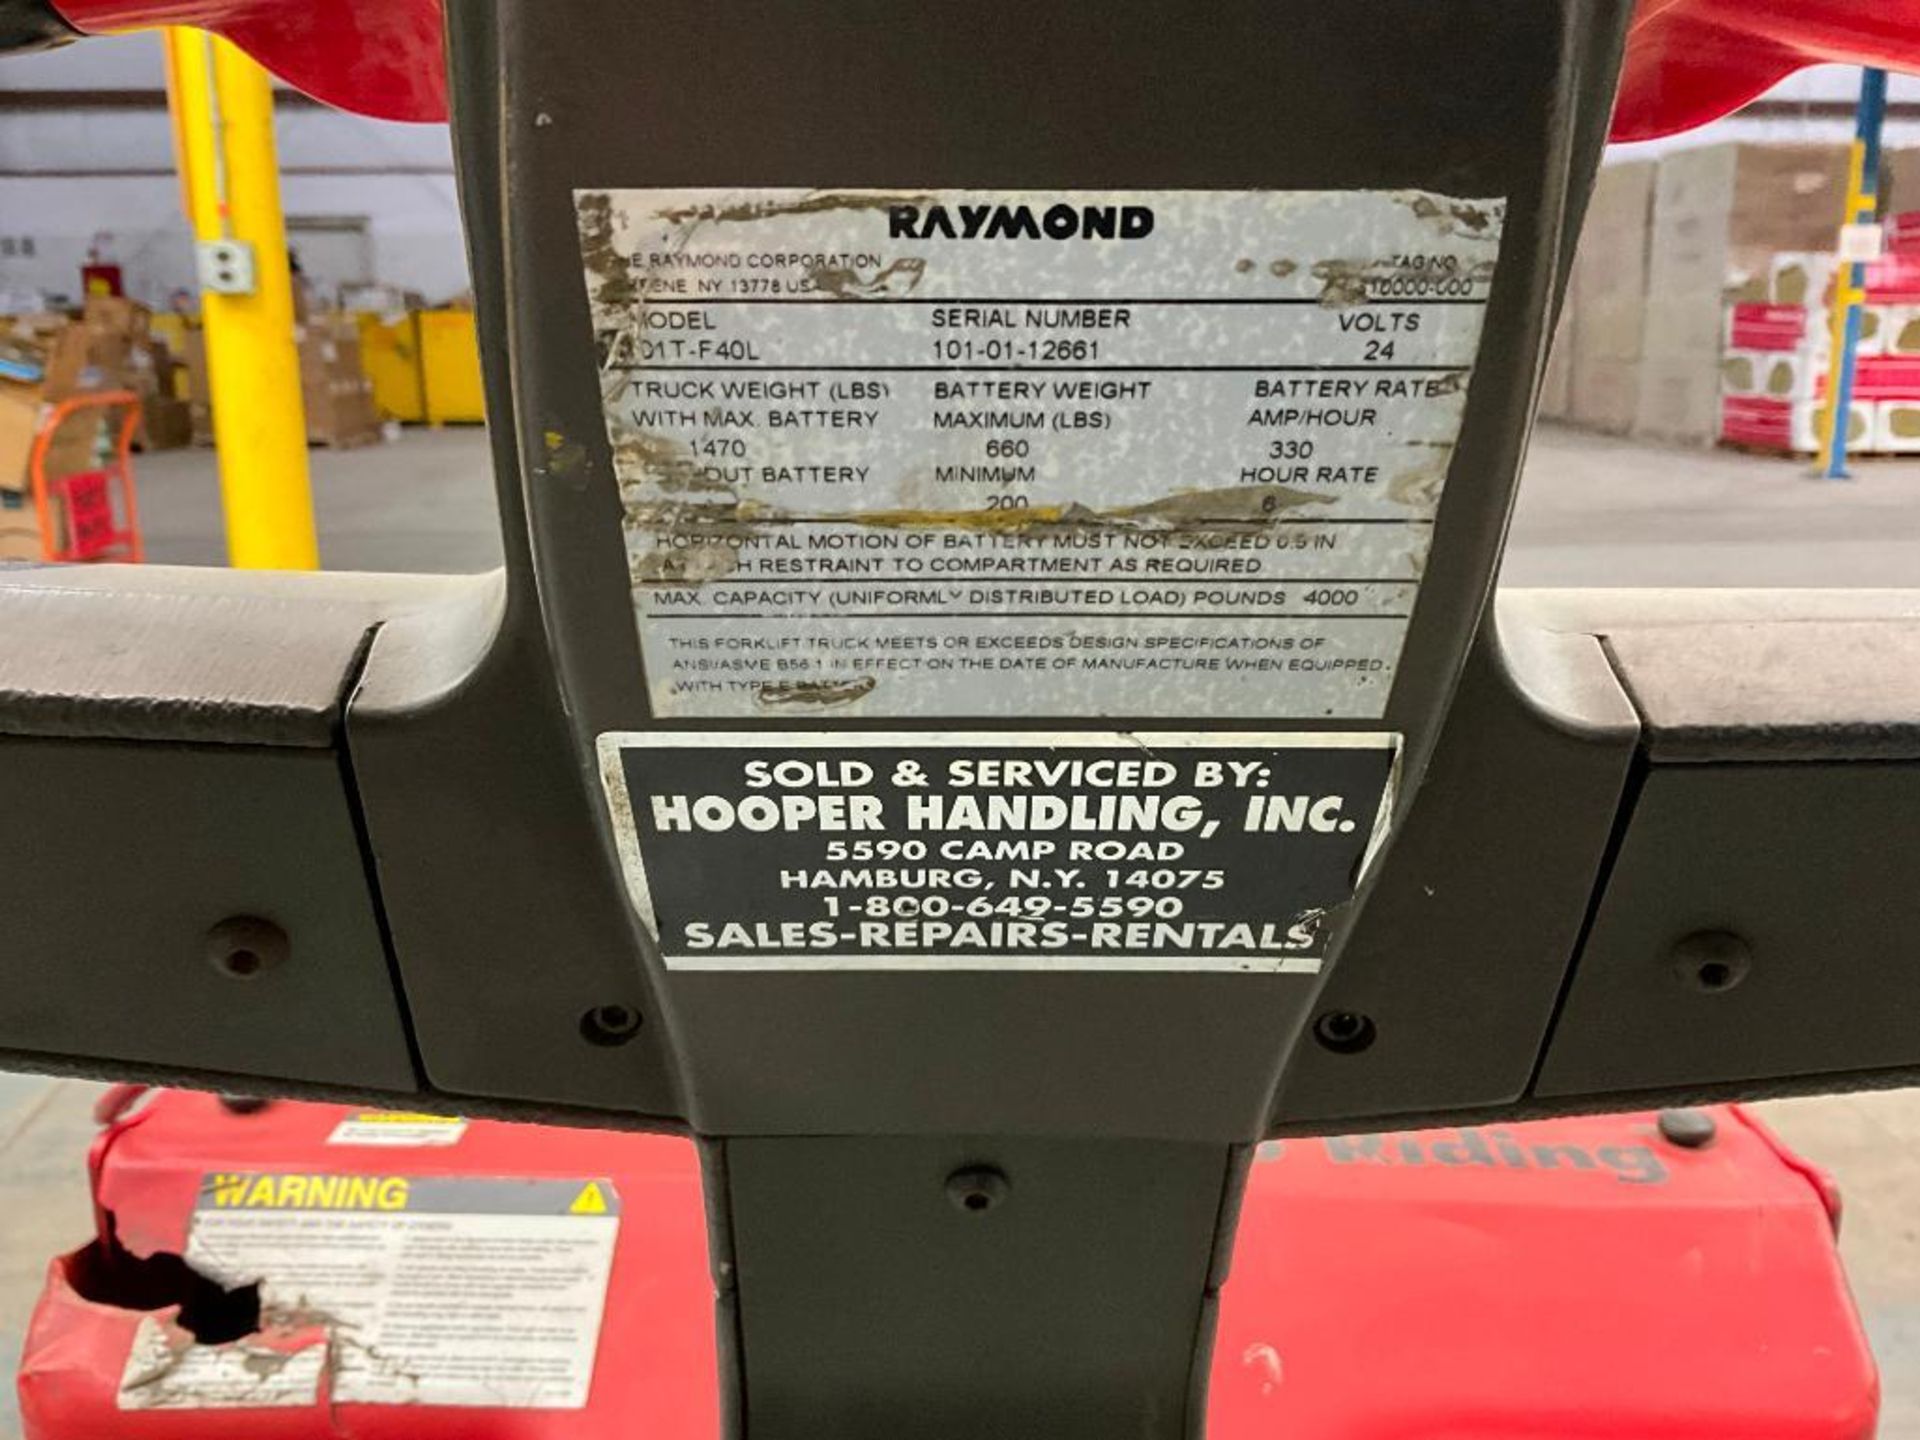 Raymond Electric Power Pallet Jack, Model 101T-F40L, S/N 101-01-12661 - Image 7 of 18